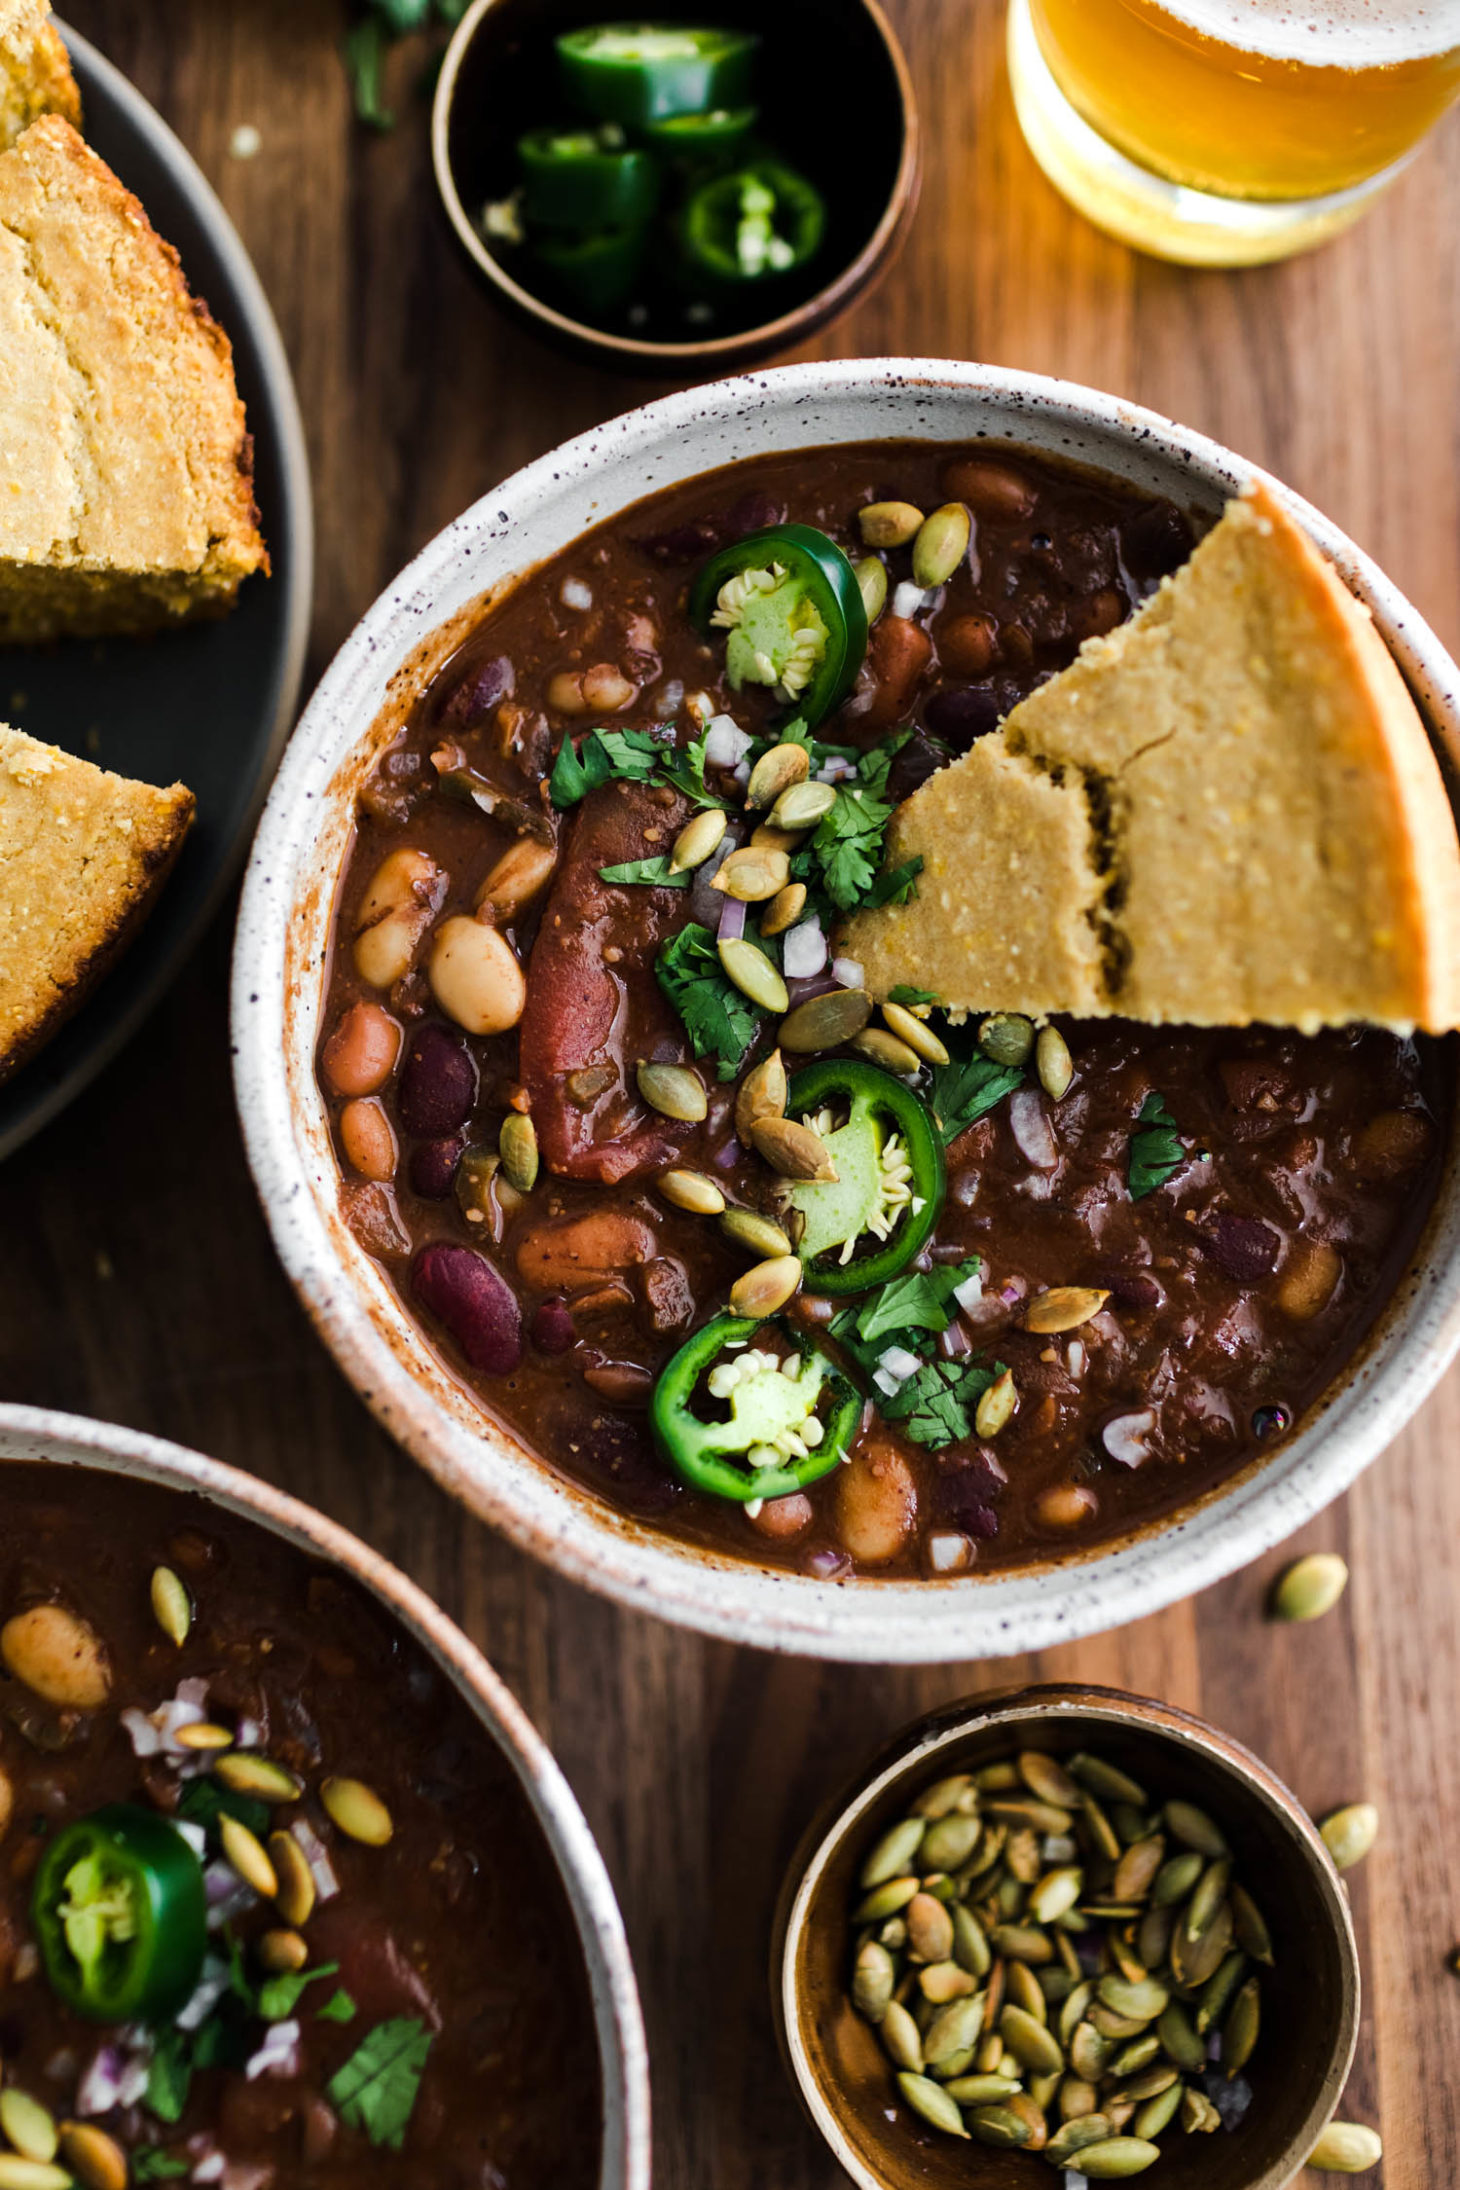 Overhead close-up view of vegan chili with cornbread and jalapenos